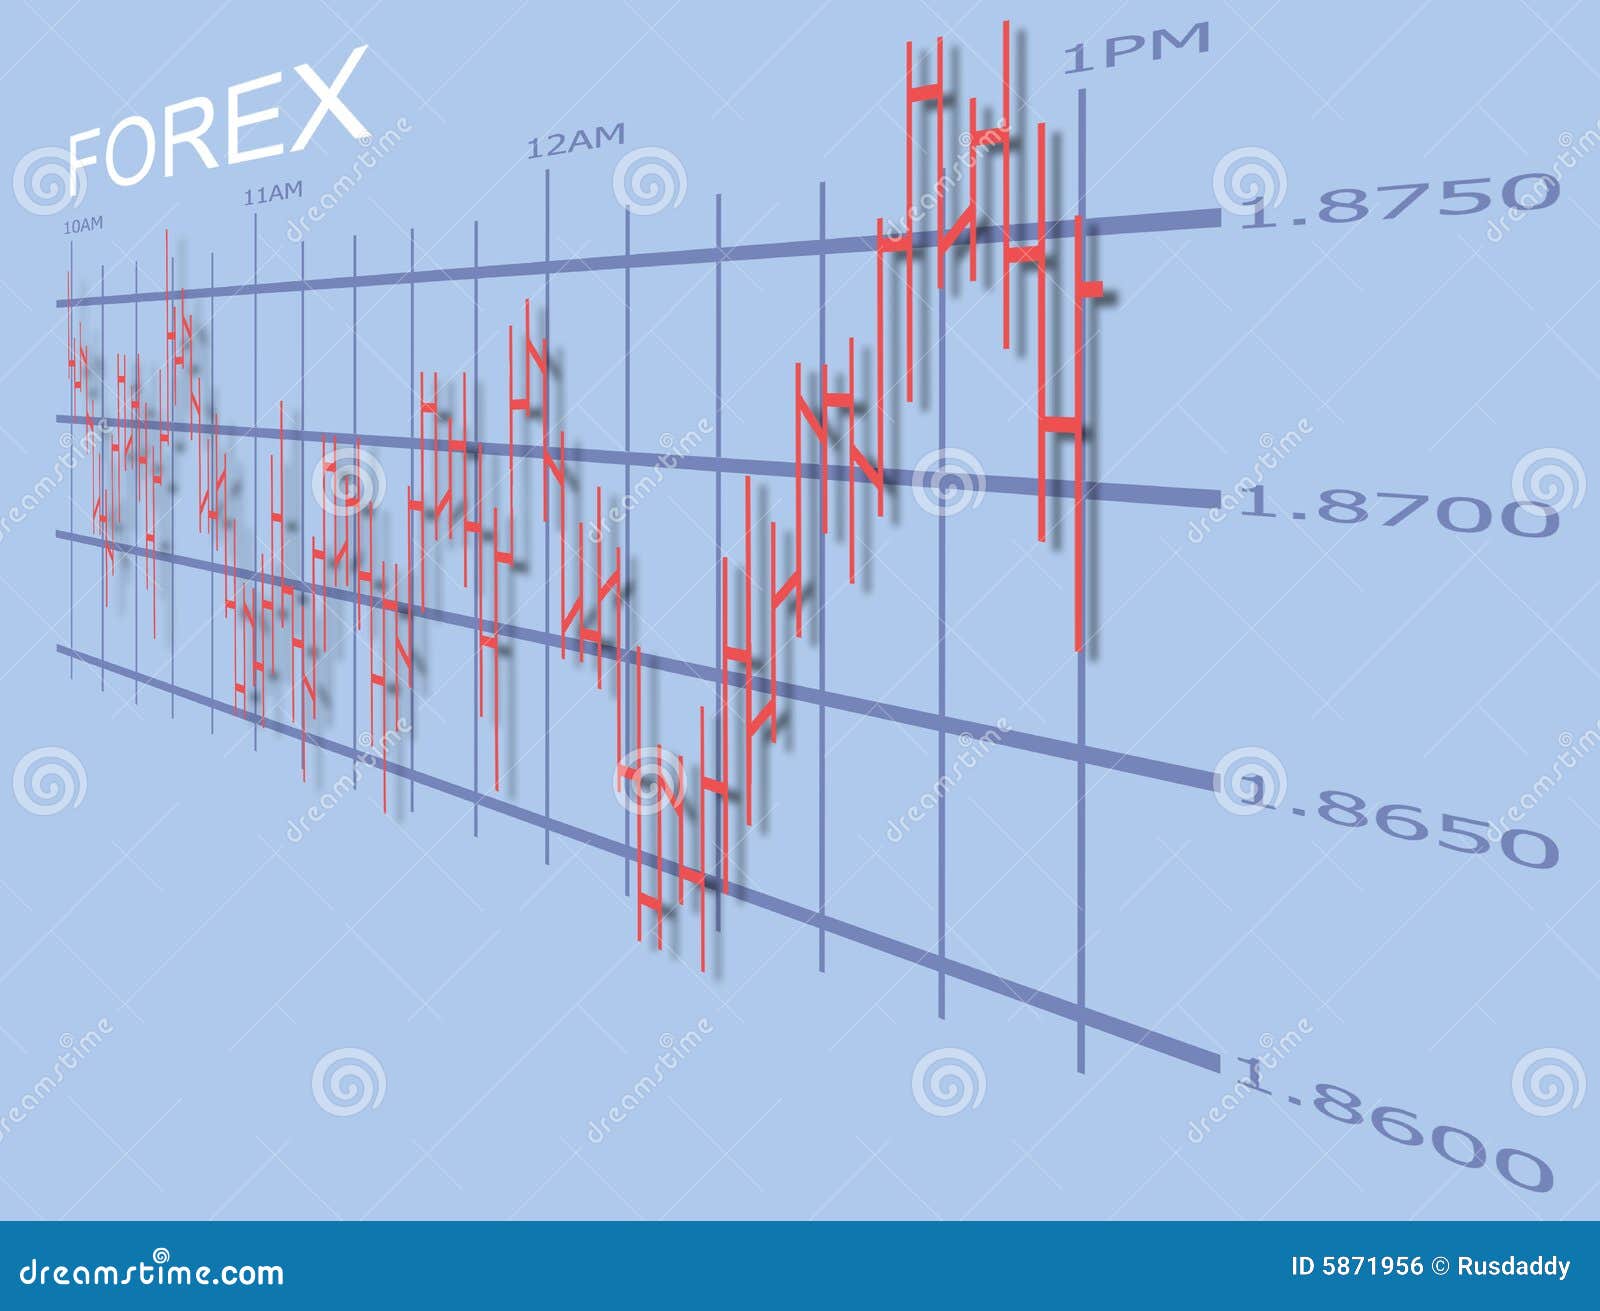 Forex Charting Tools